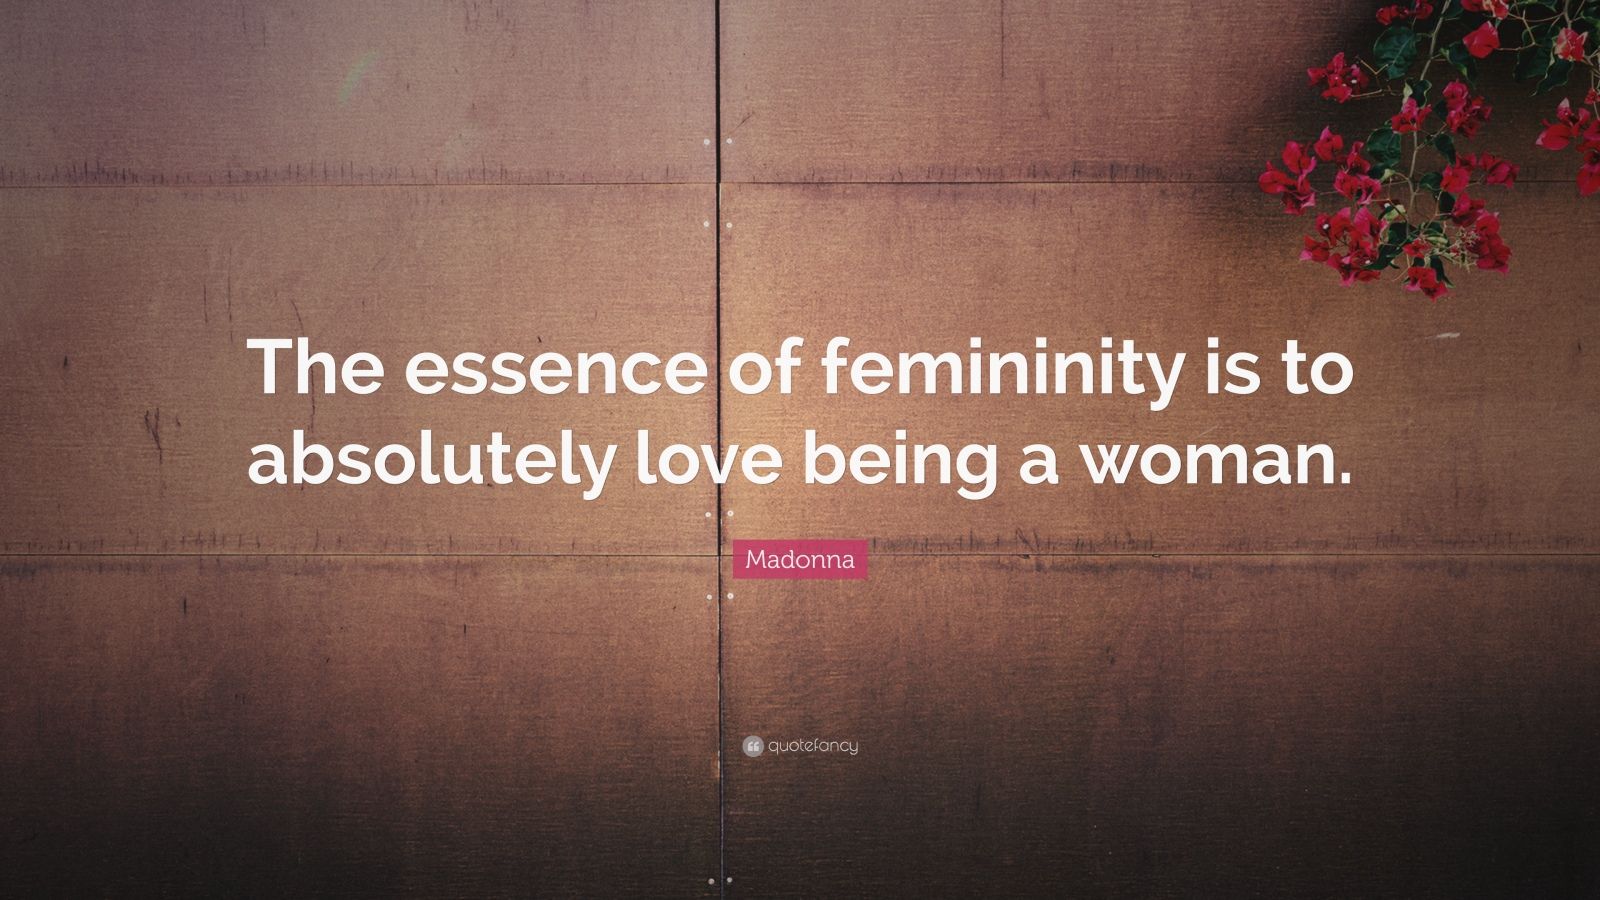 Madonna Quote: “The essence of femininity is to absolutely love being a